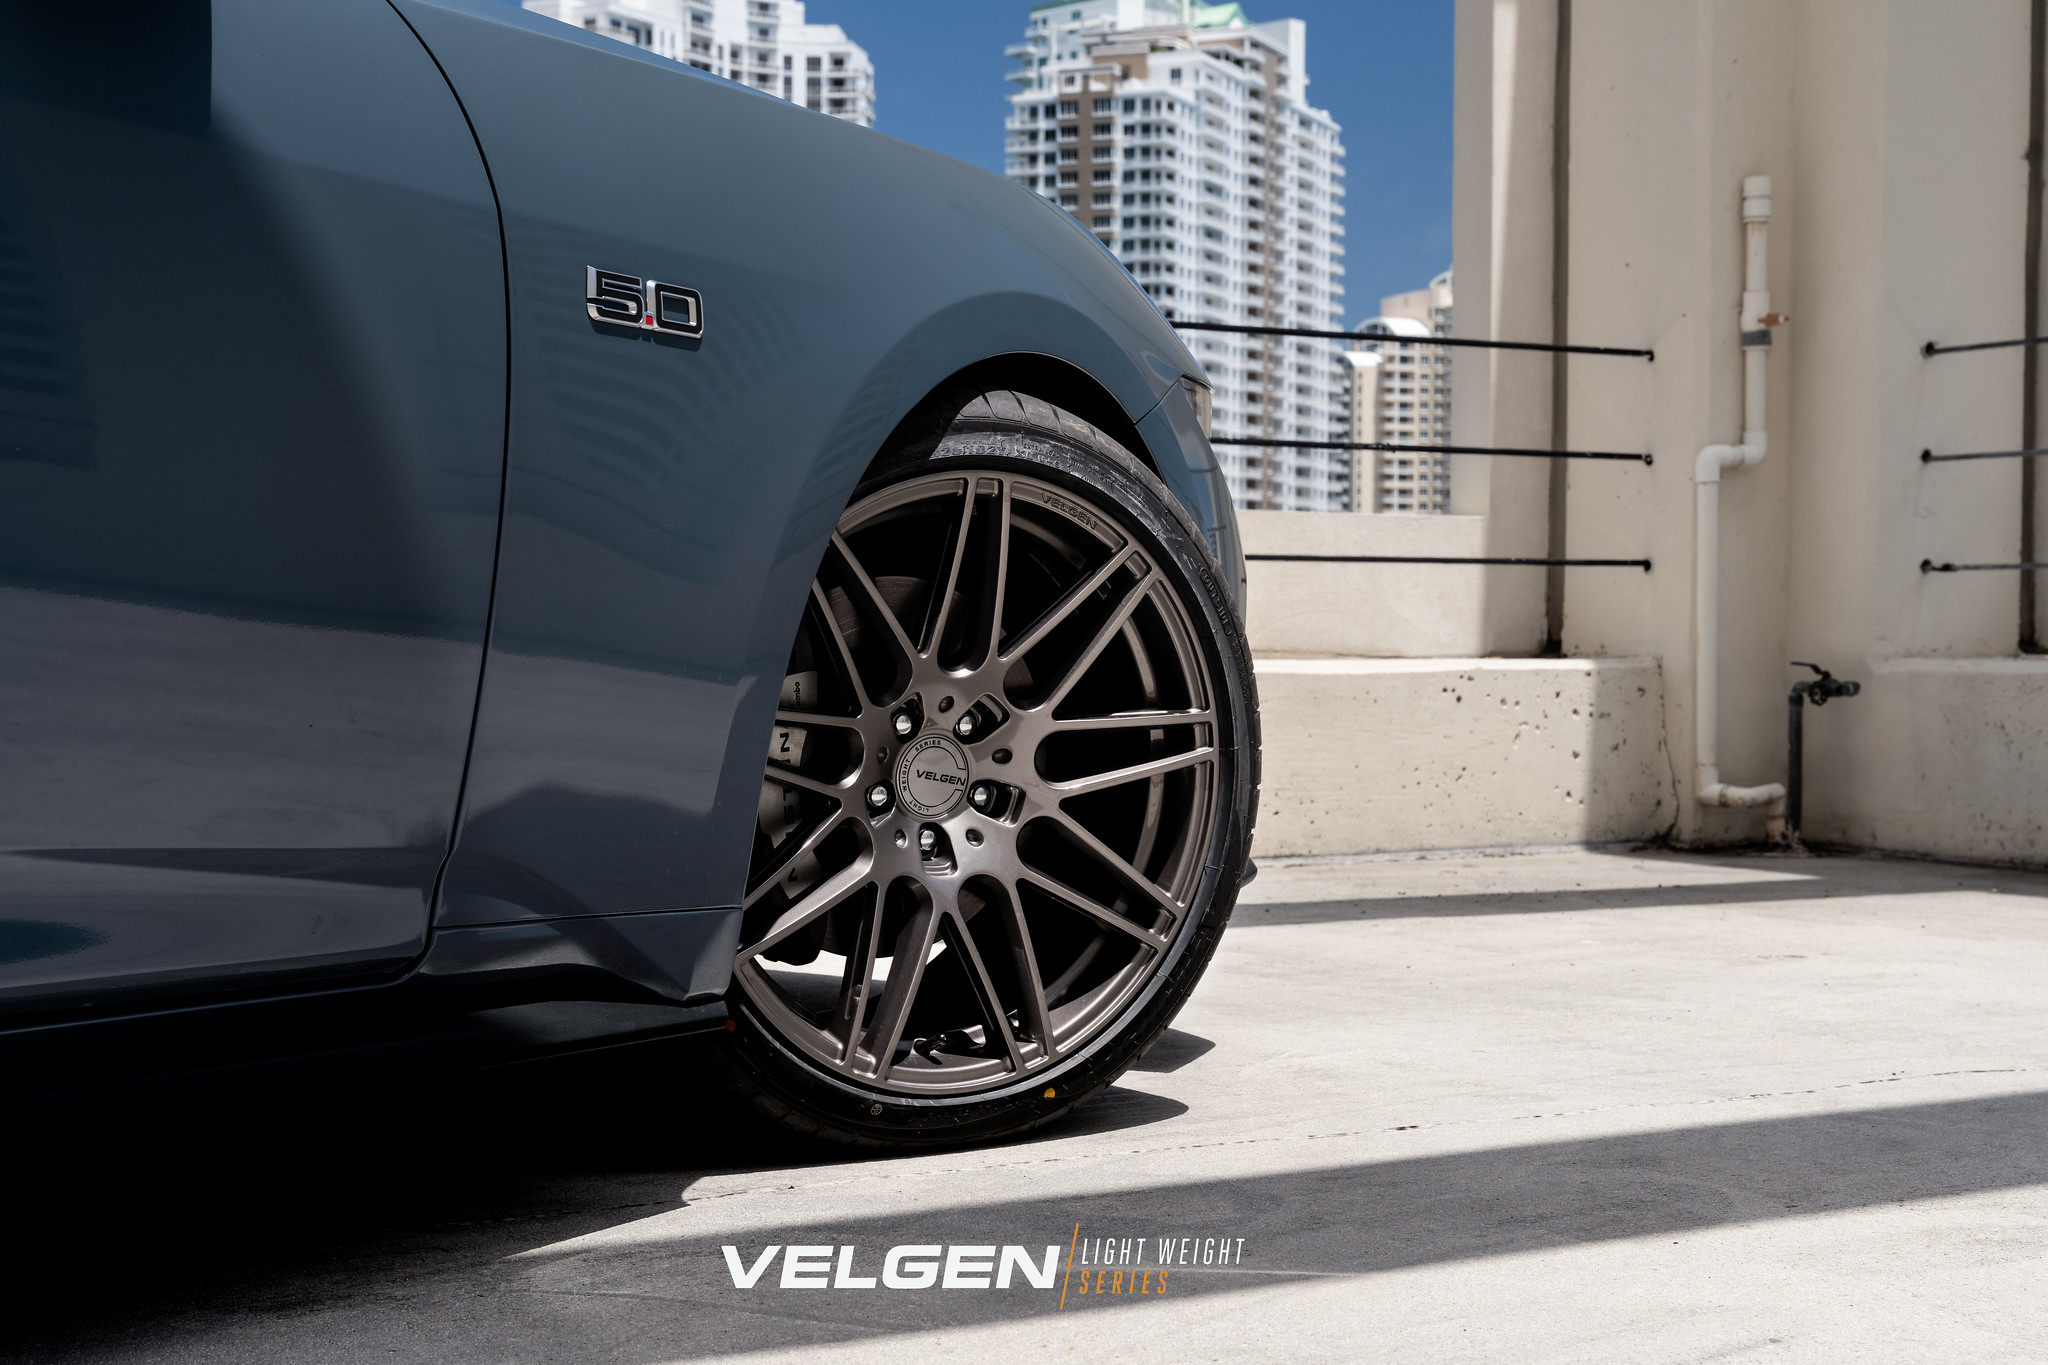 S650 Mustang Velgen wheels for your S650 Mustang | Vibe Motorsports 53681051944_8a4db9c512_k